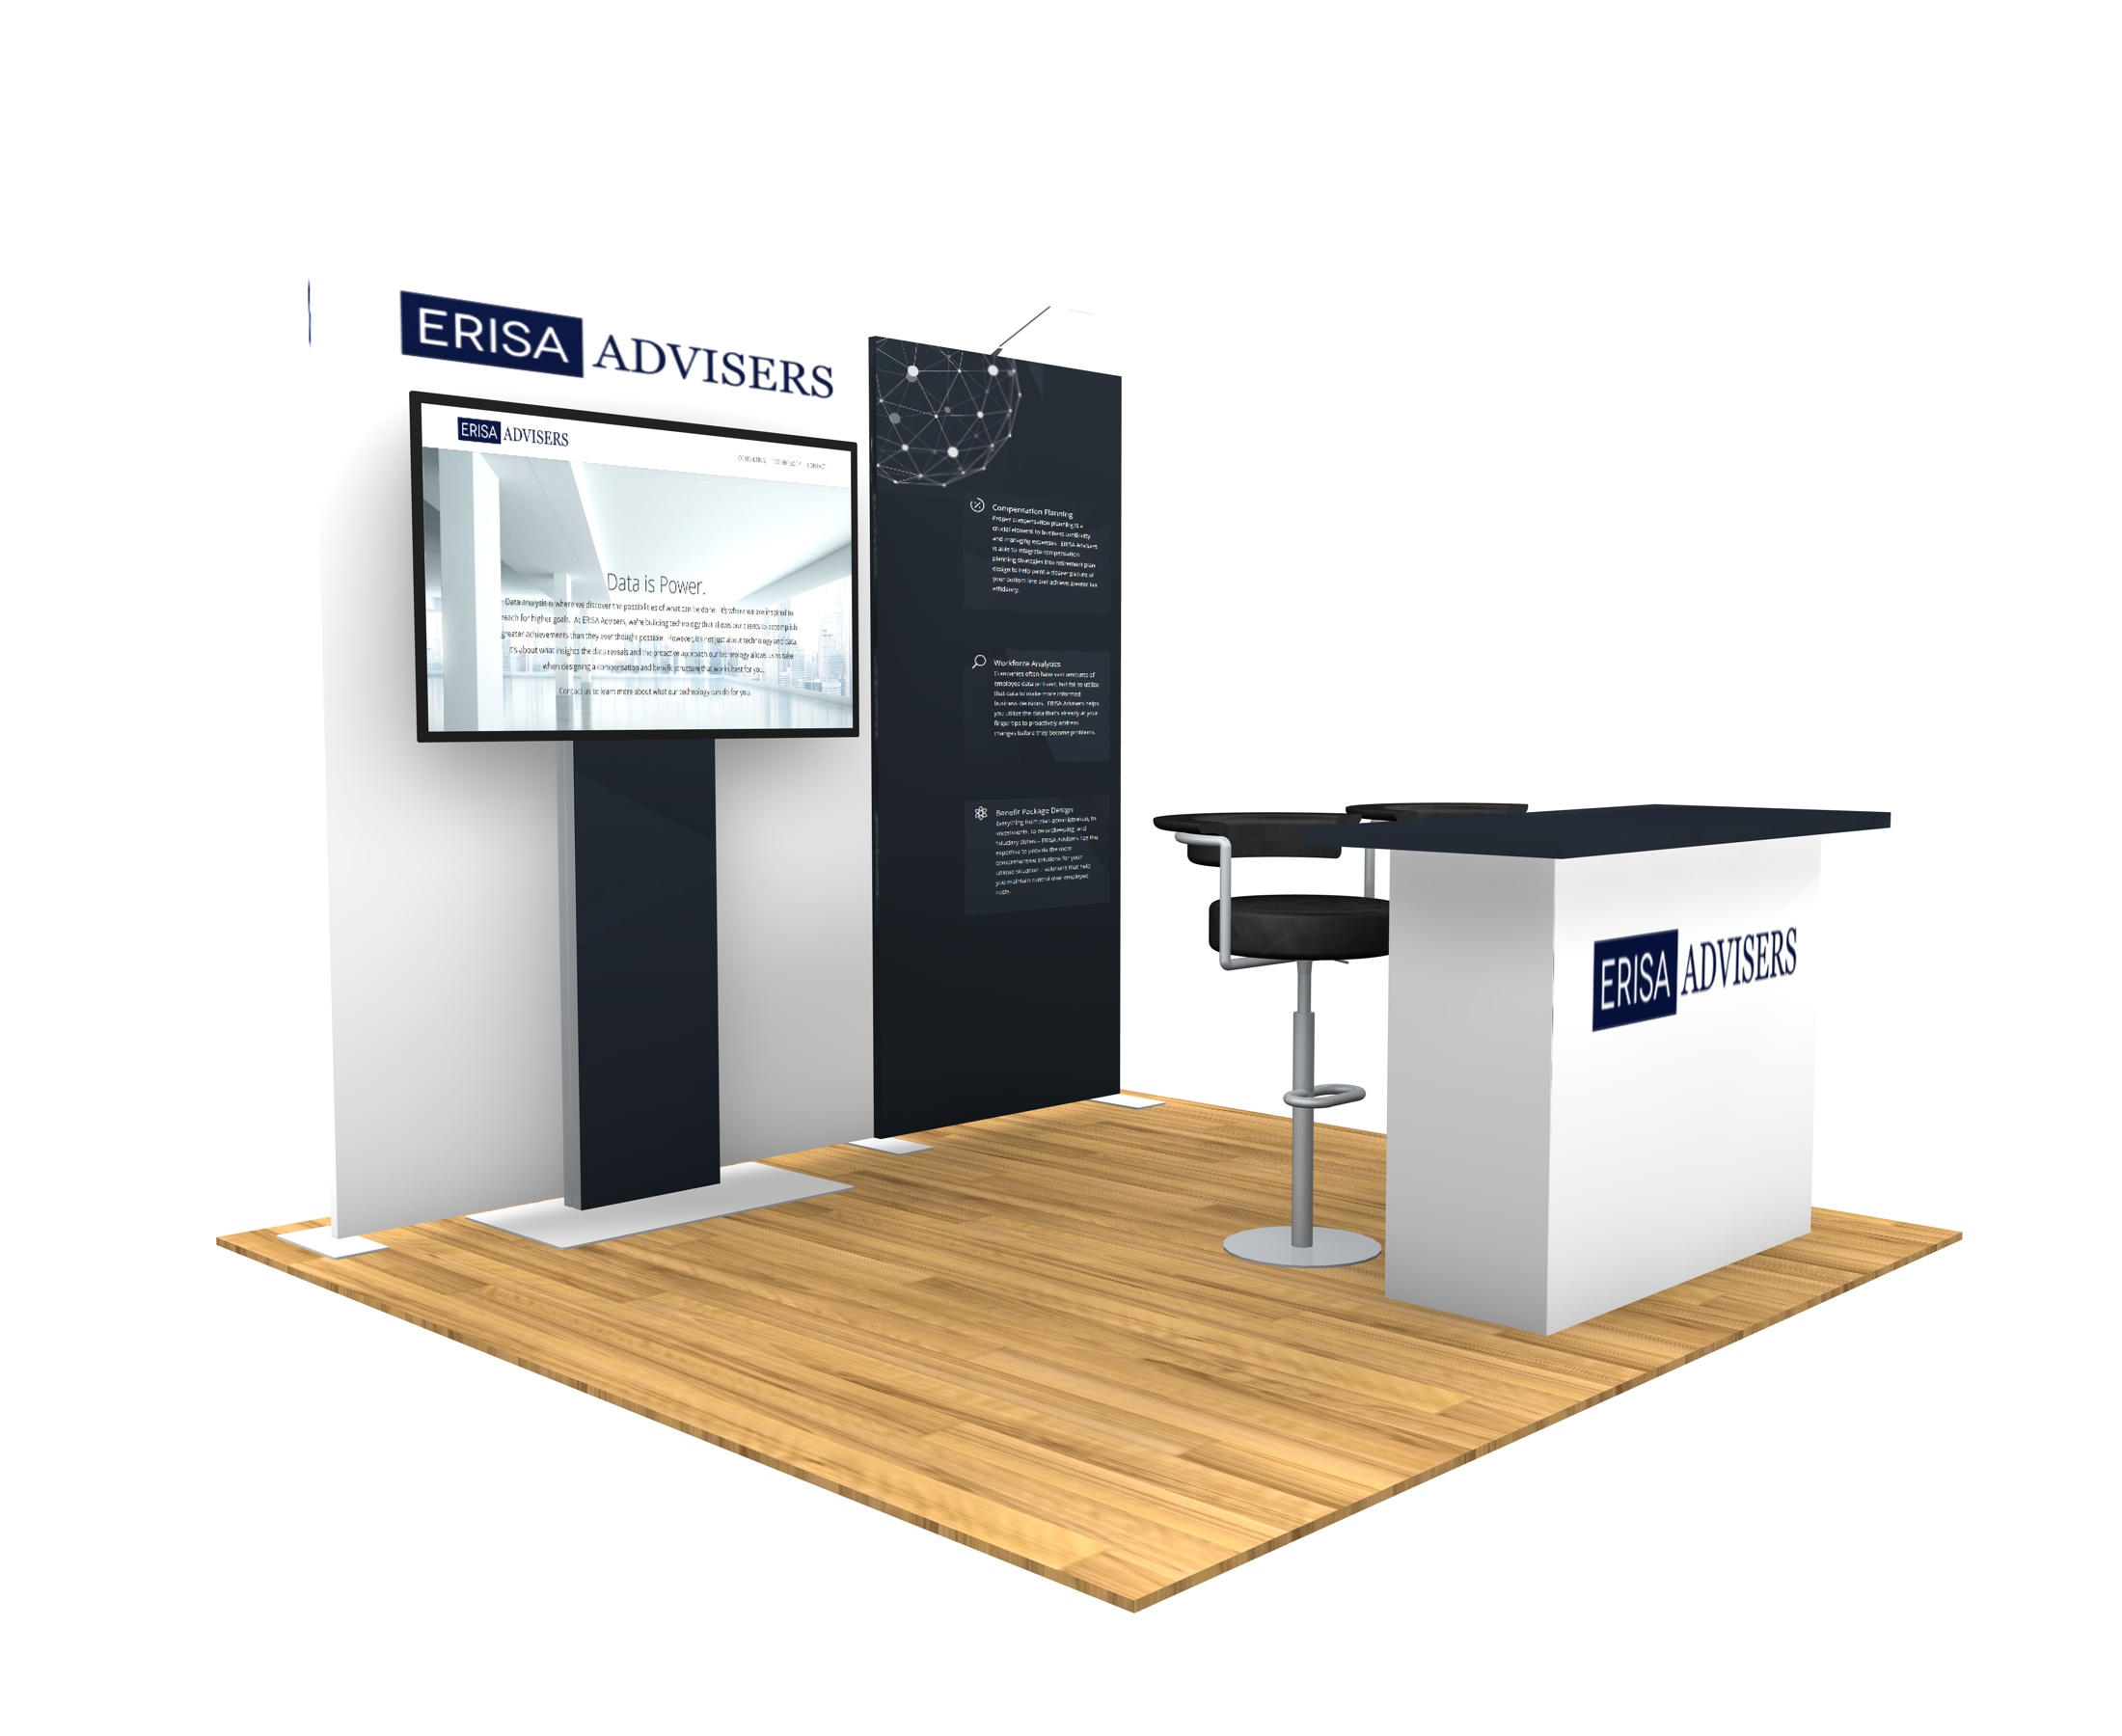 10x10-turn-key-trade-show-booth-design-1401-booking-relations